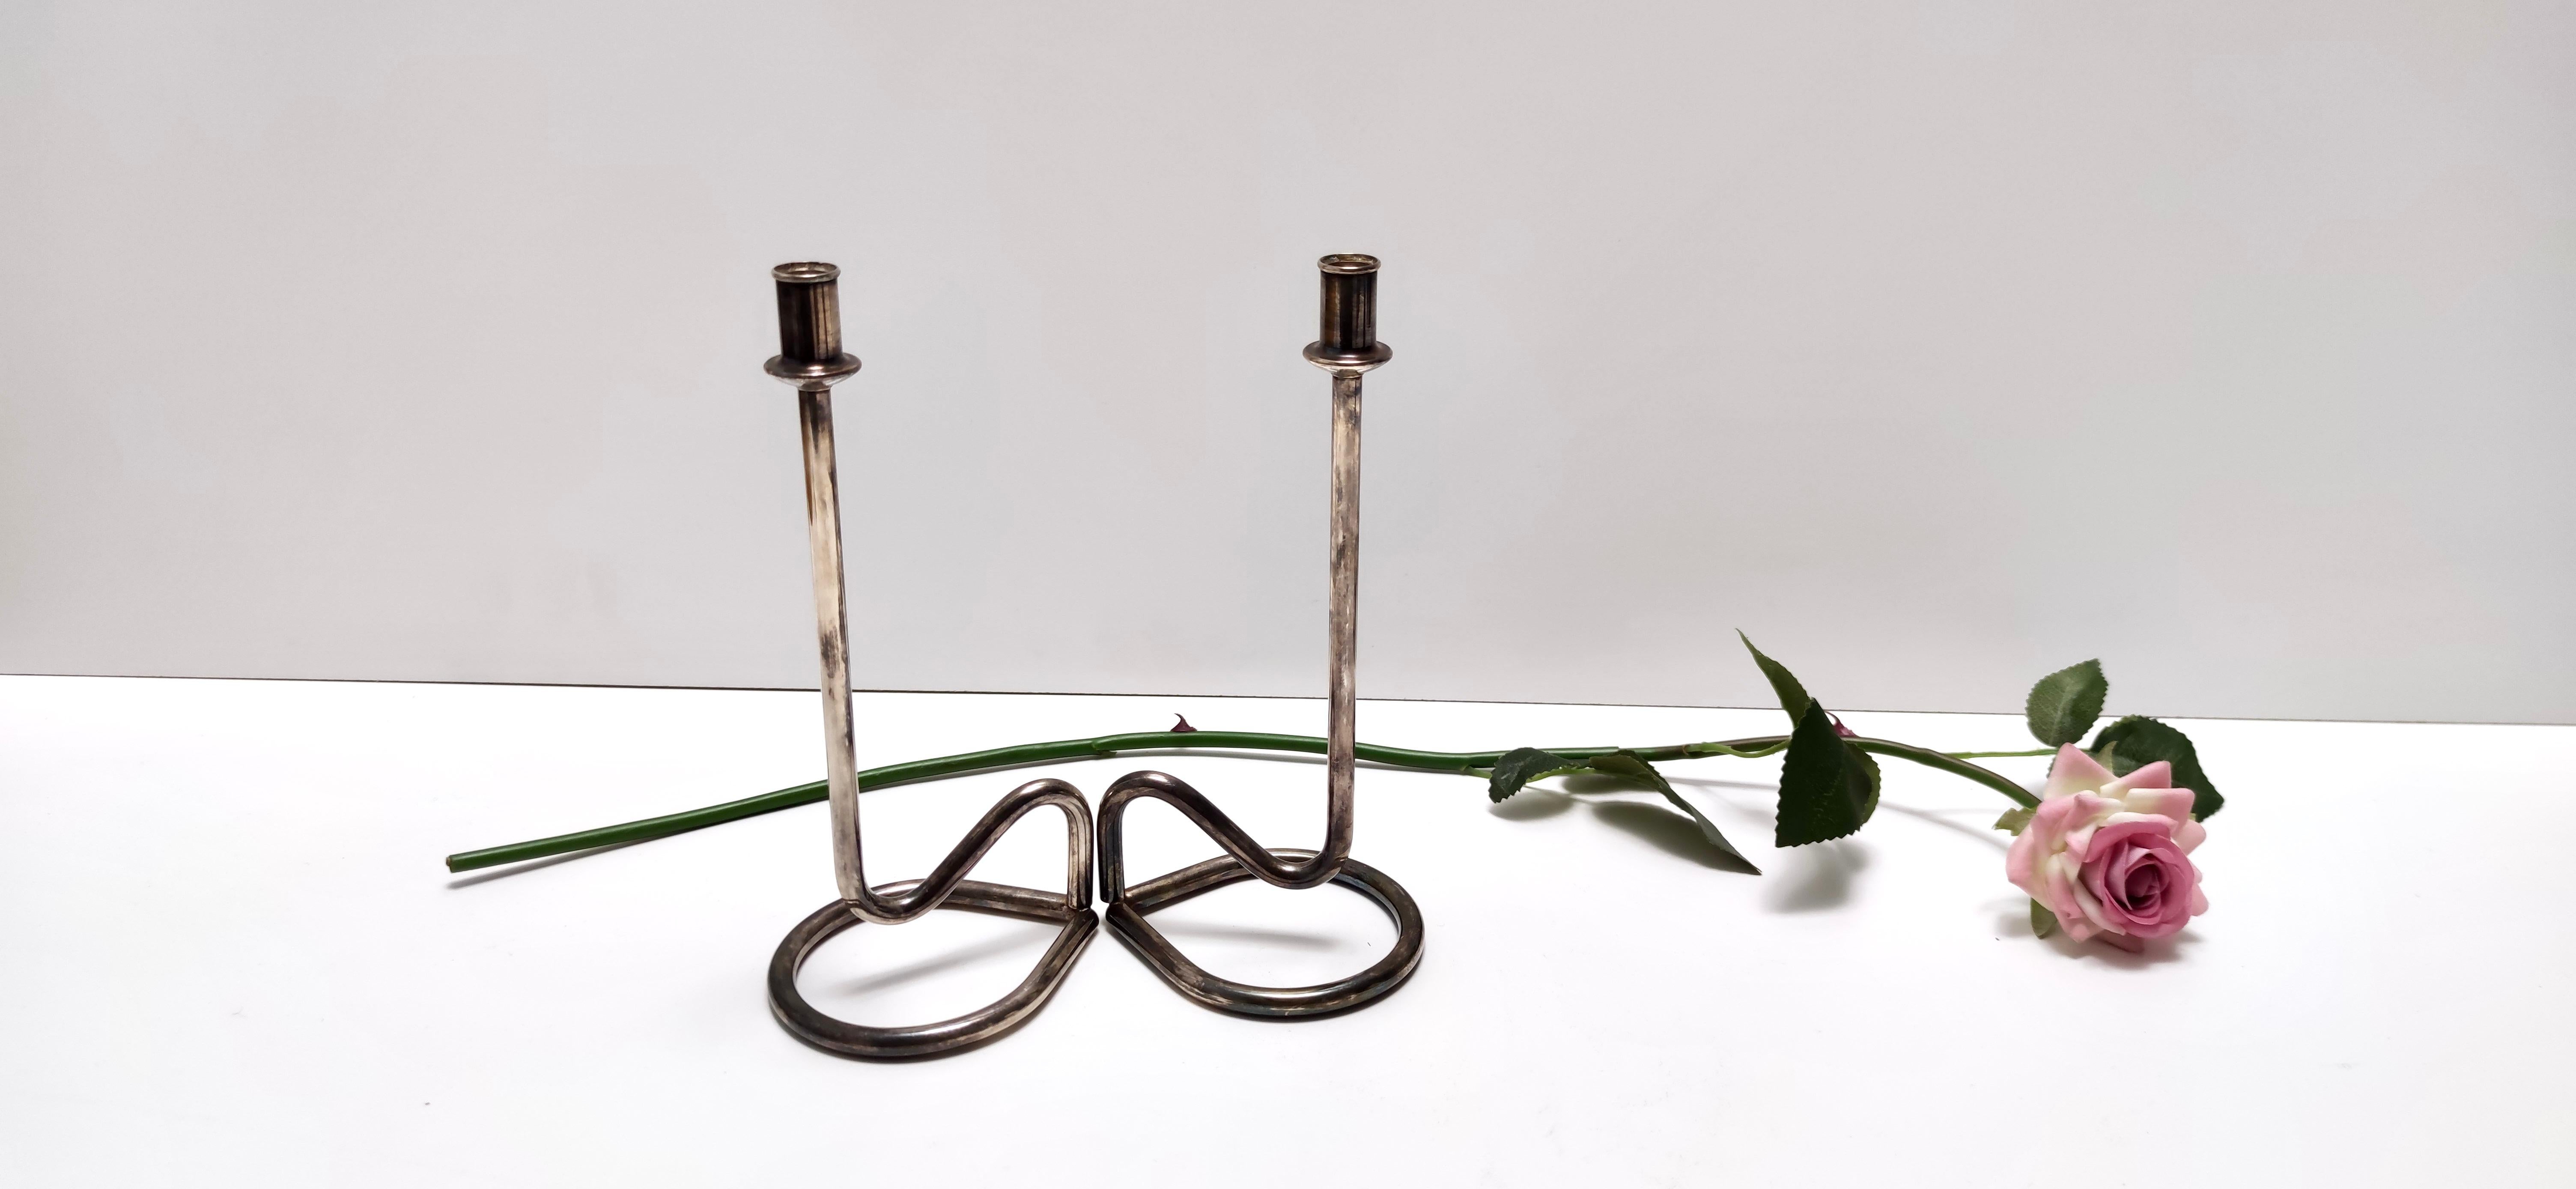 Made in Italy, 1990s. 
They are made in silver plated metal. 
These candleholder are vintage, therefore they might show slight traces of use, but they can be considered as in very good original condition and ready to become a piece in a home. 
On